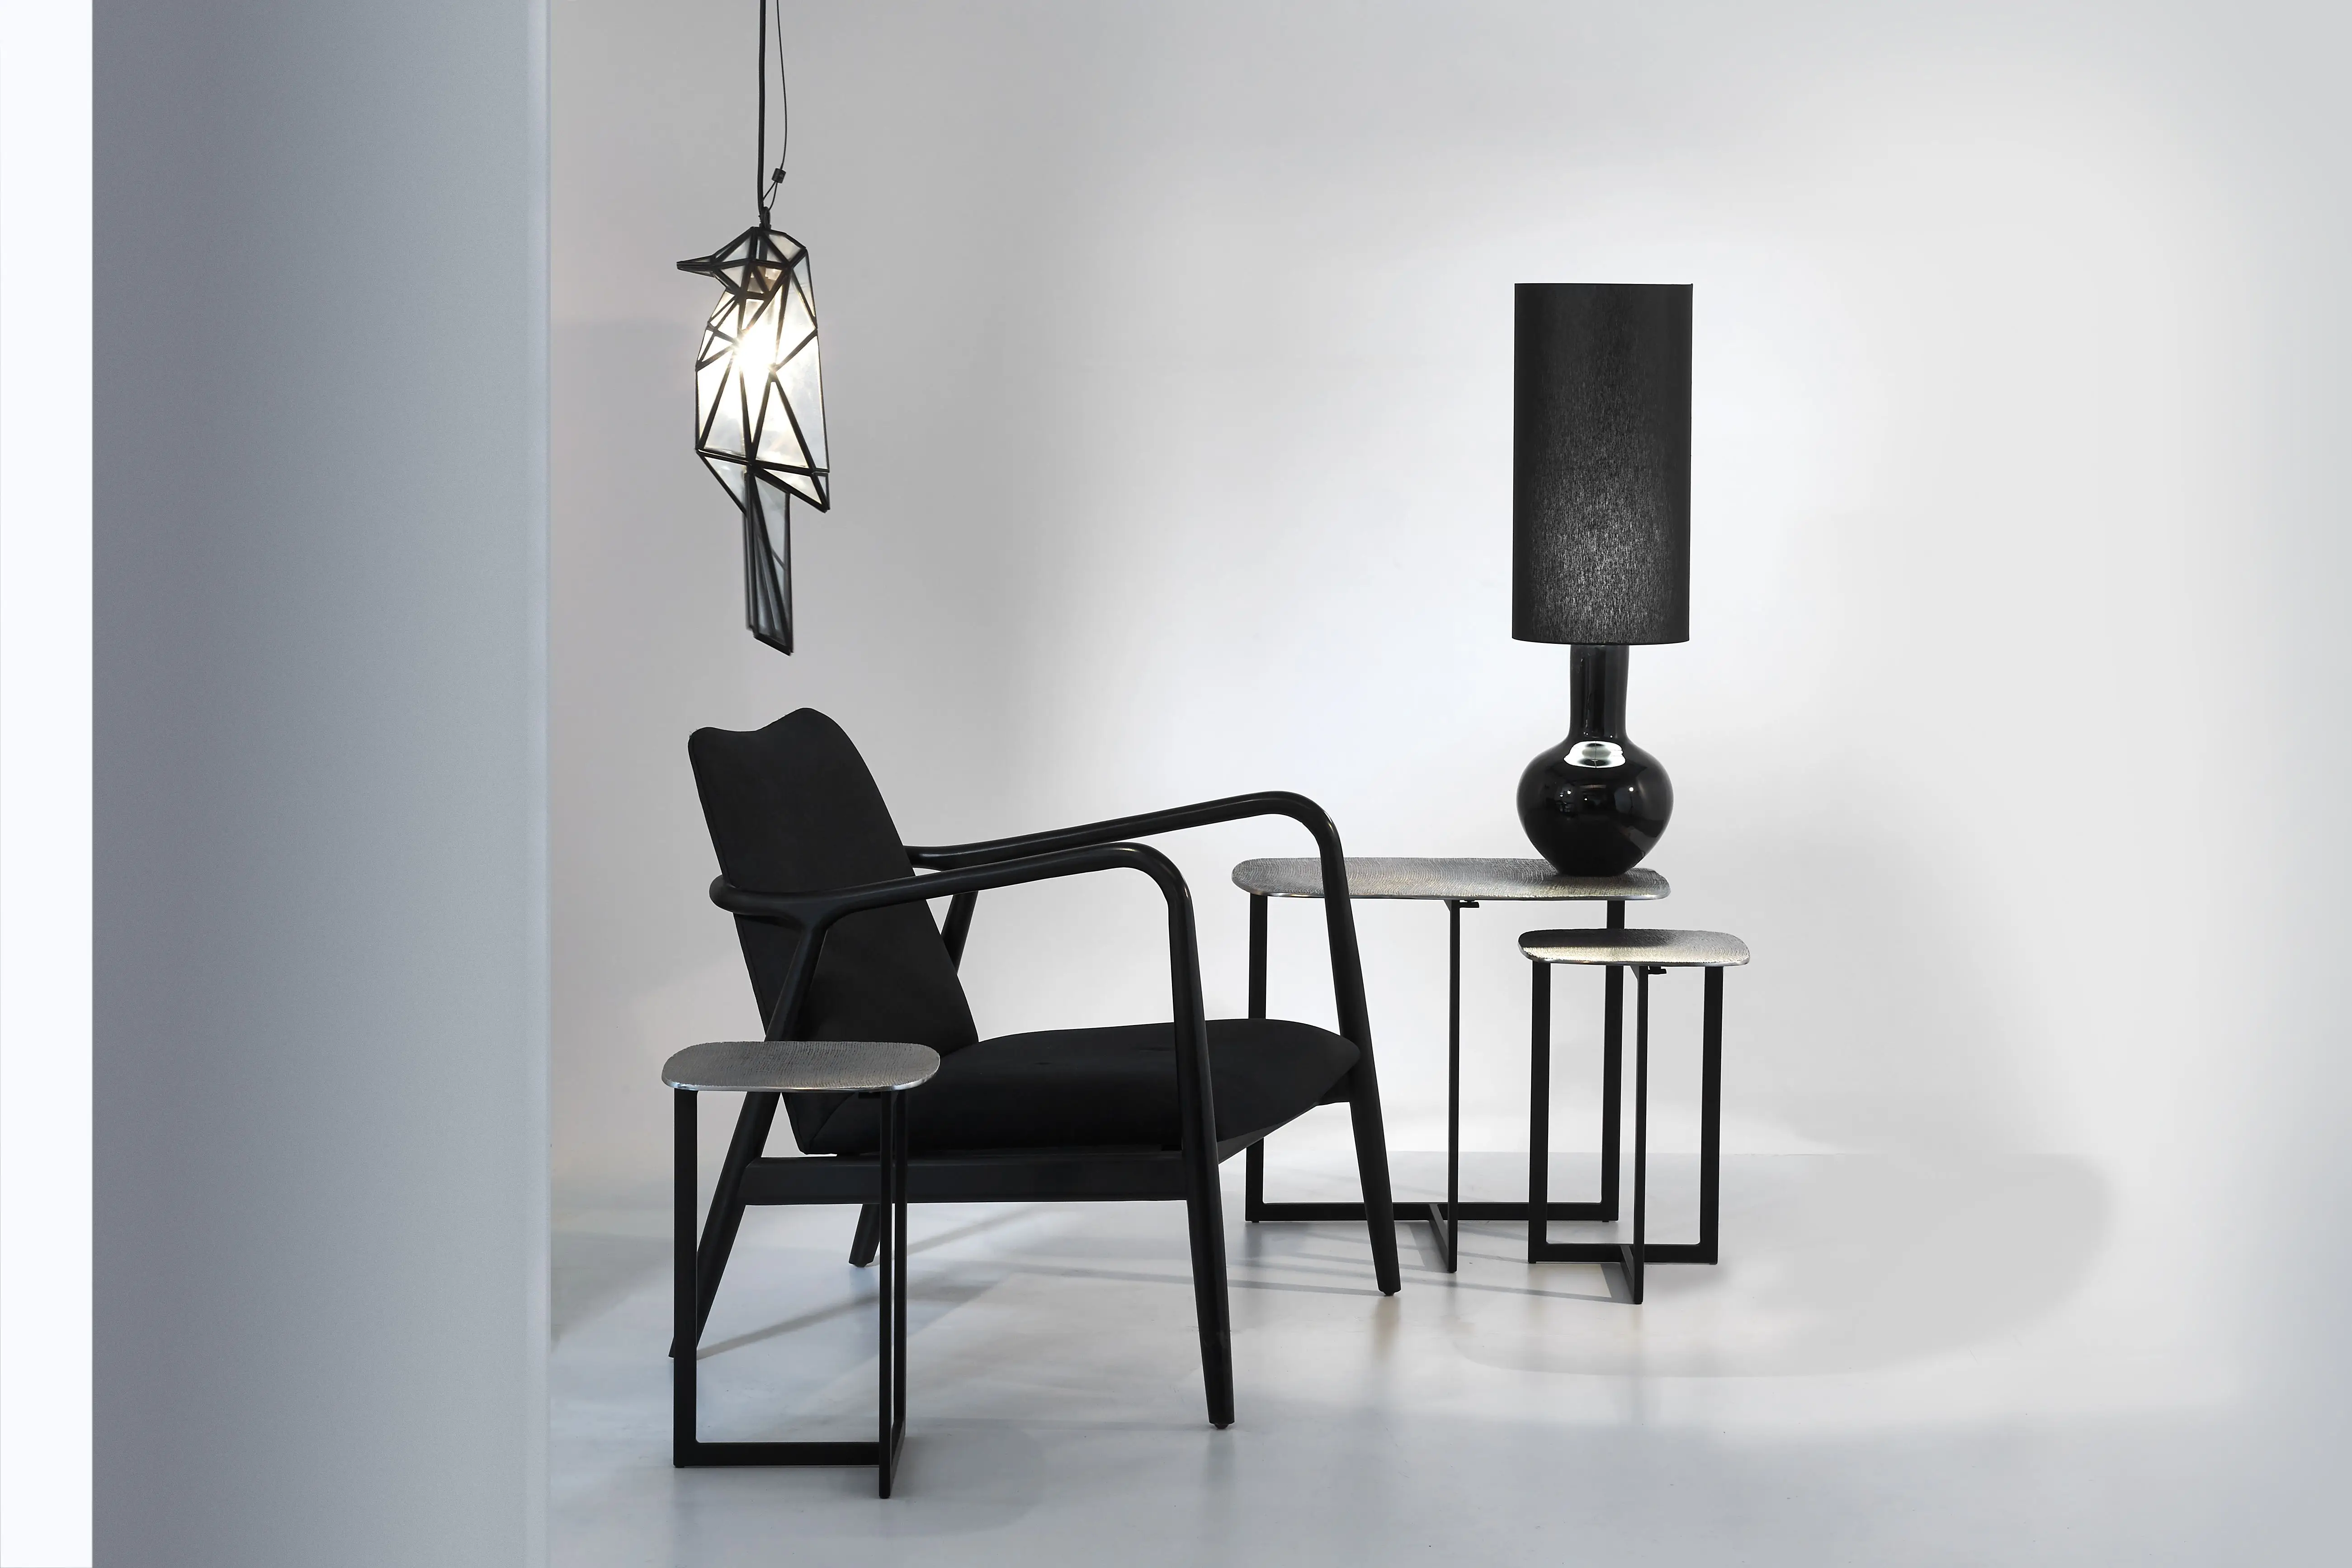 Hanging lamp Martin by Pols Potten